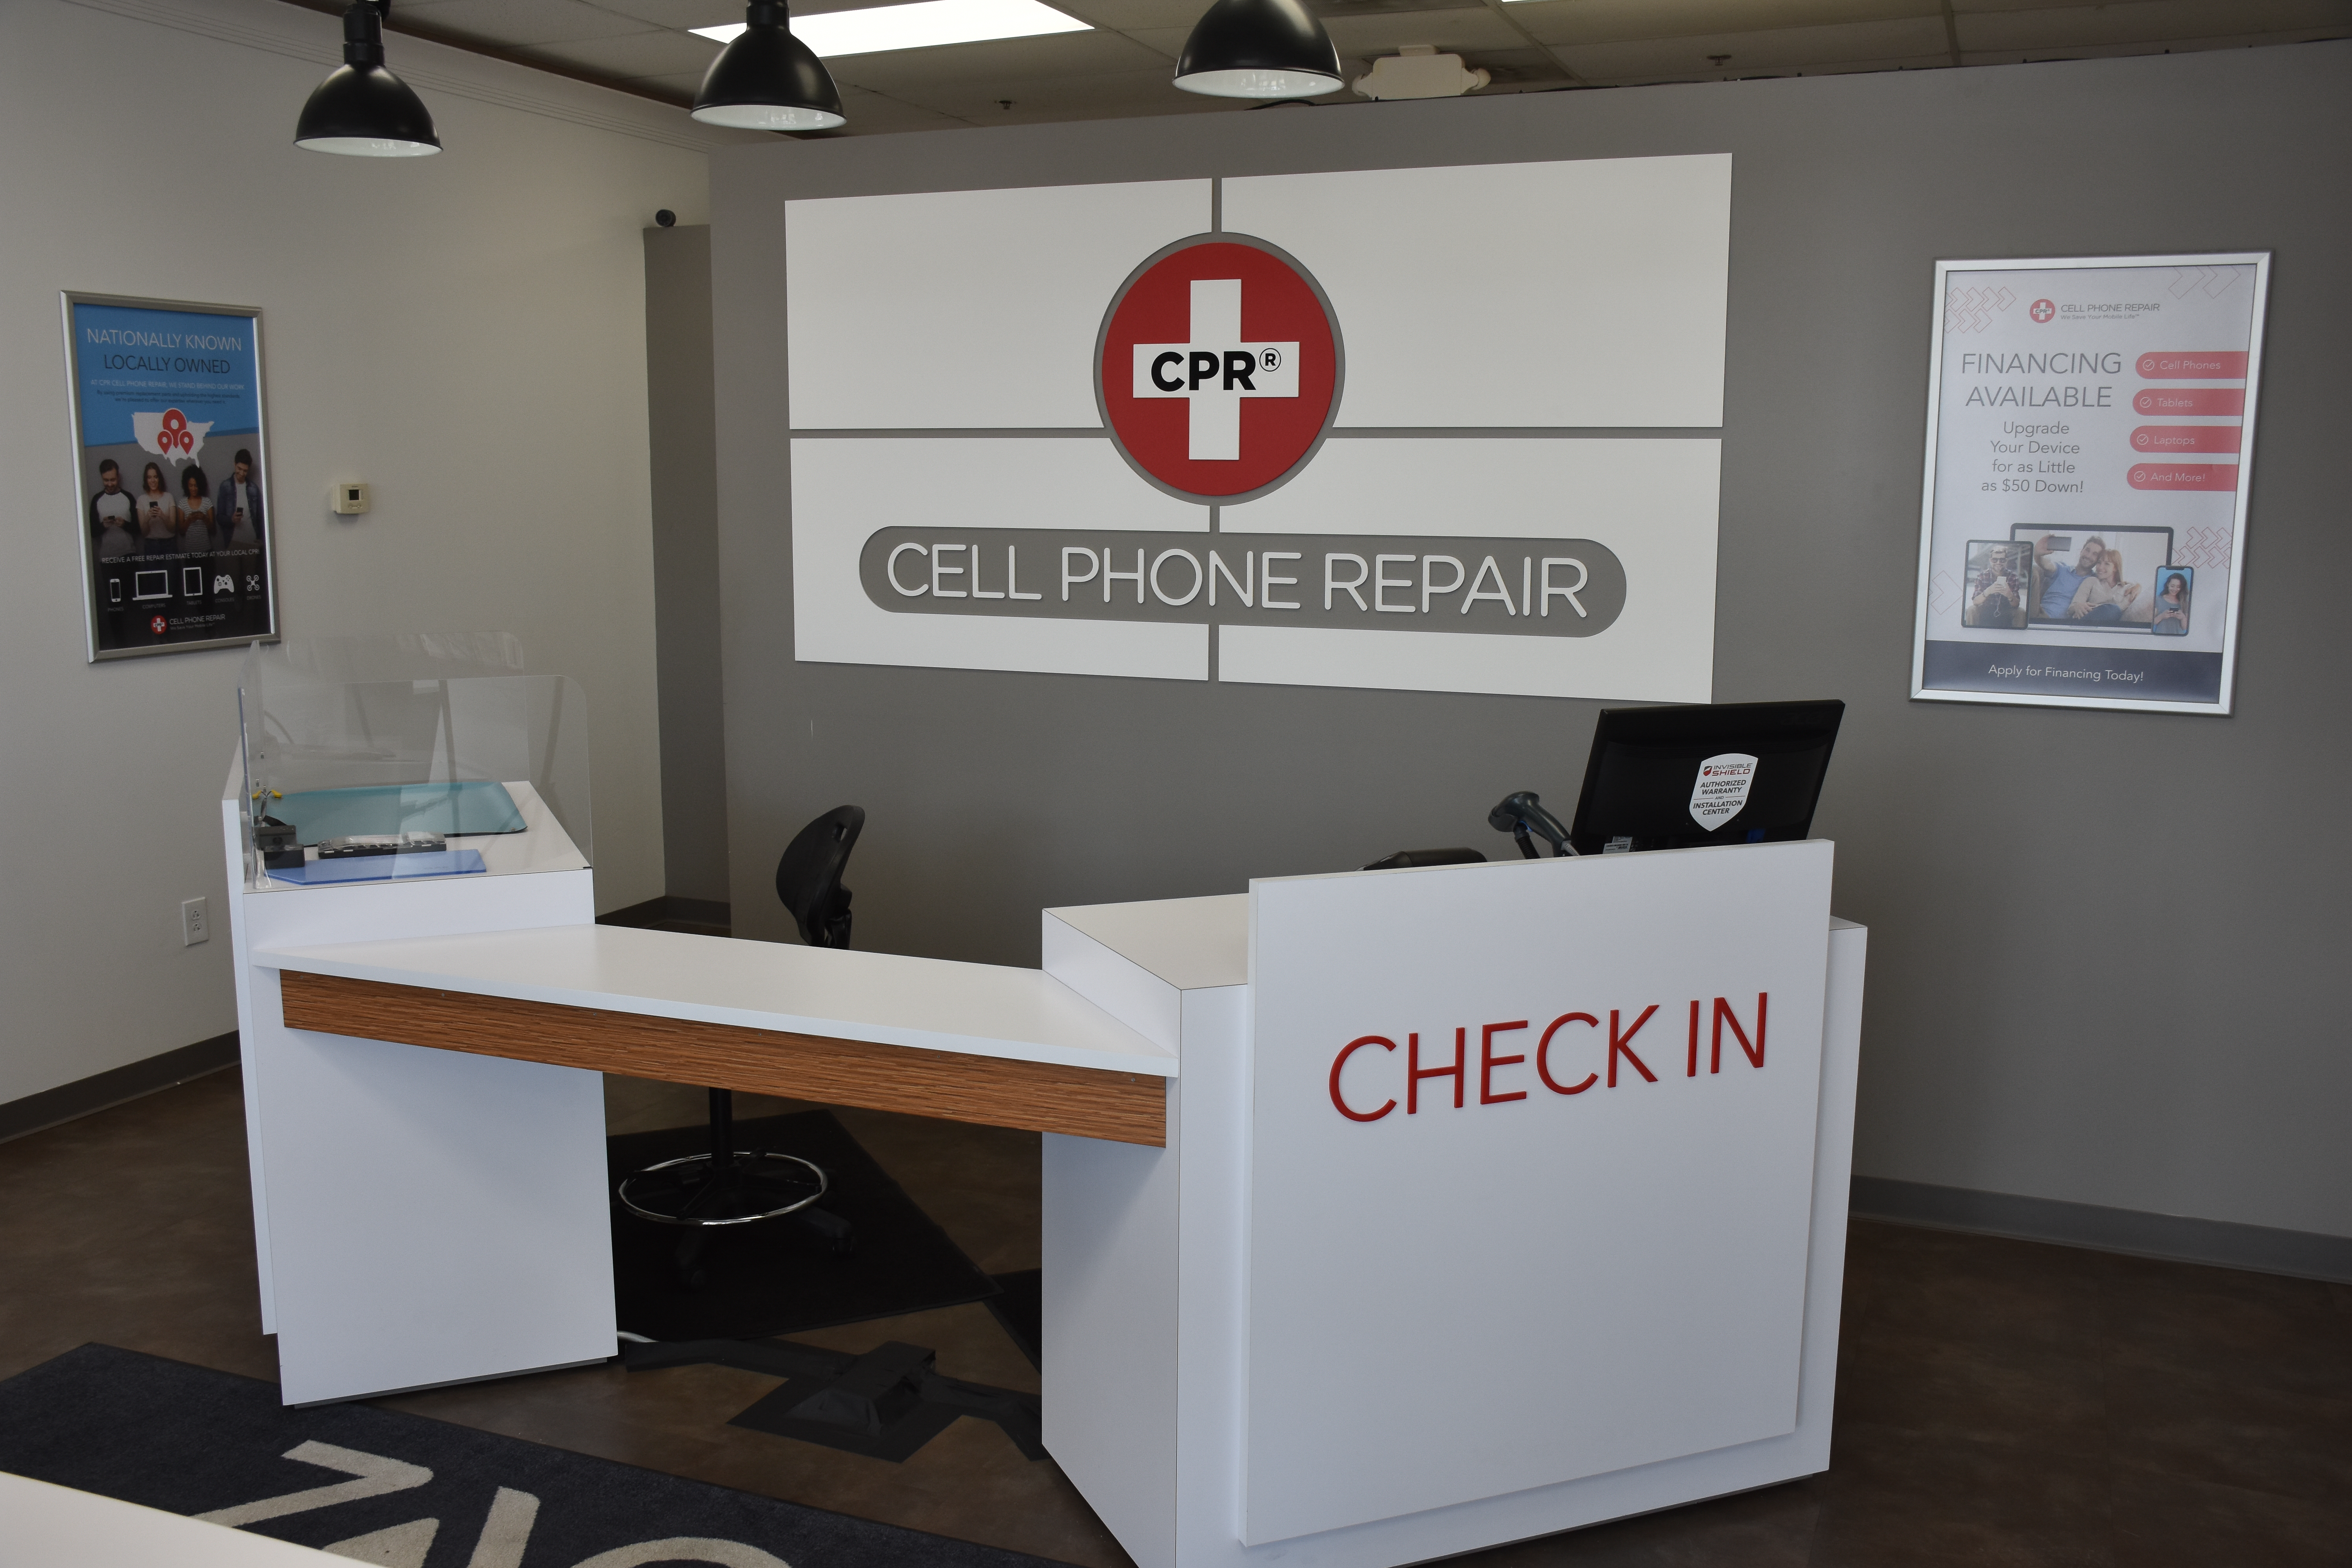 CPR Cell Phone Repair, Friday, January 29, 2021, Press release picture